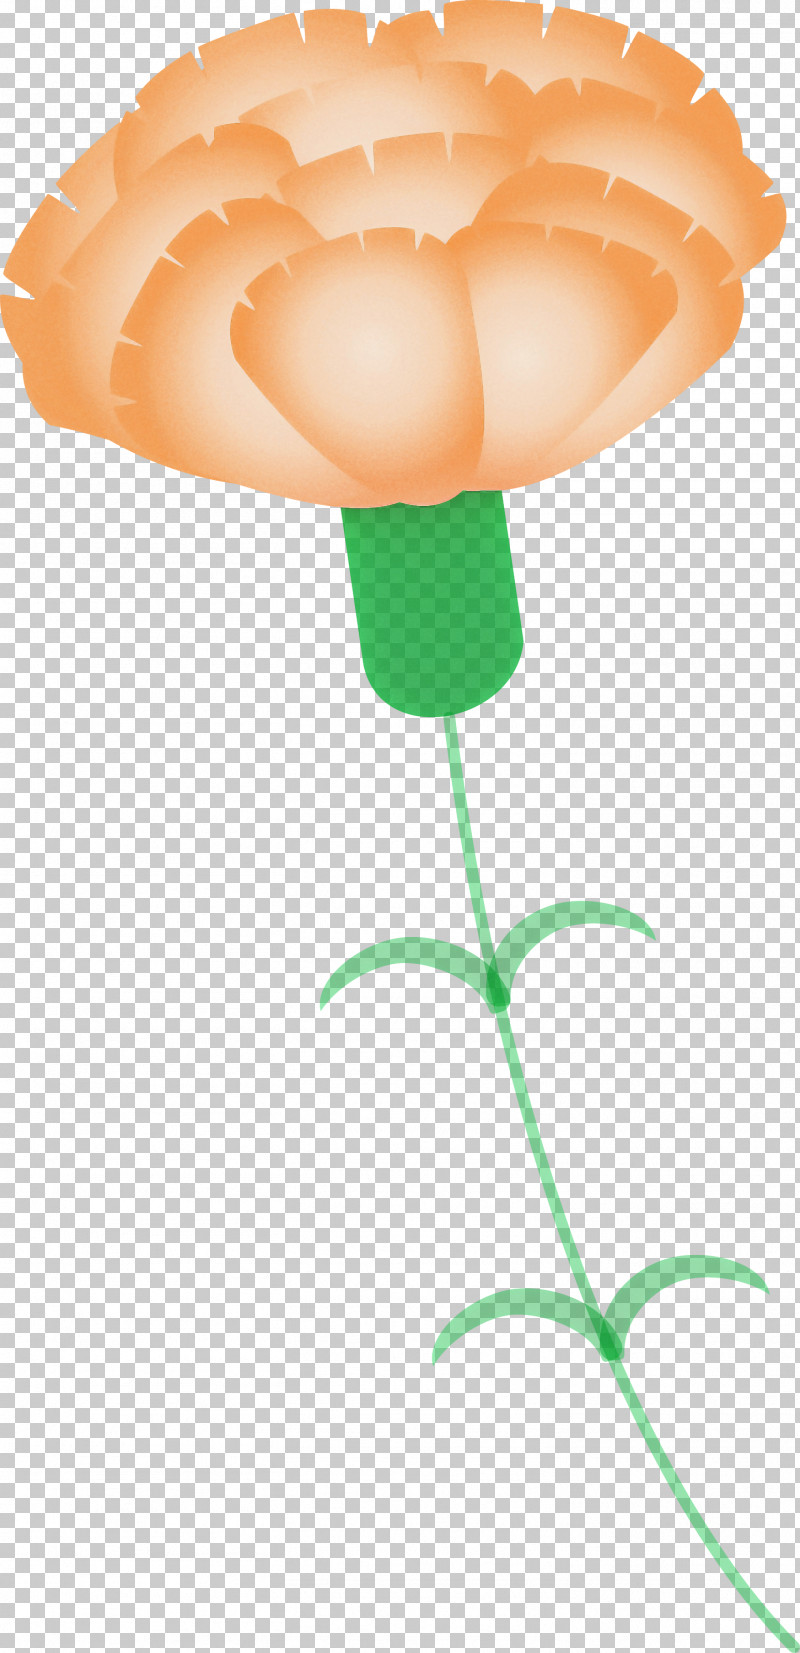 Mothers Day Carnation Mothers Day Flower PNG, Clipart, Flower, Mothers Day Carnation, Mothers Day Flower, Orange, Plant Free PNG Download